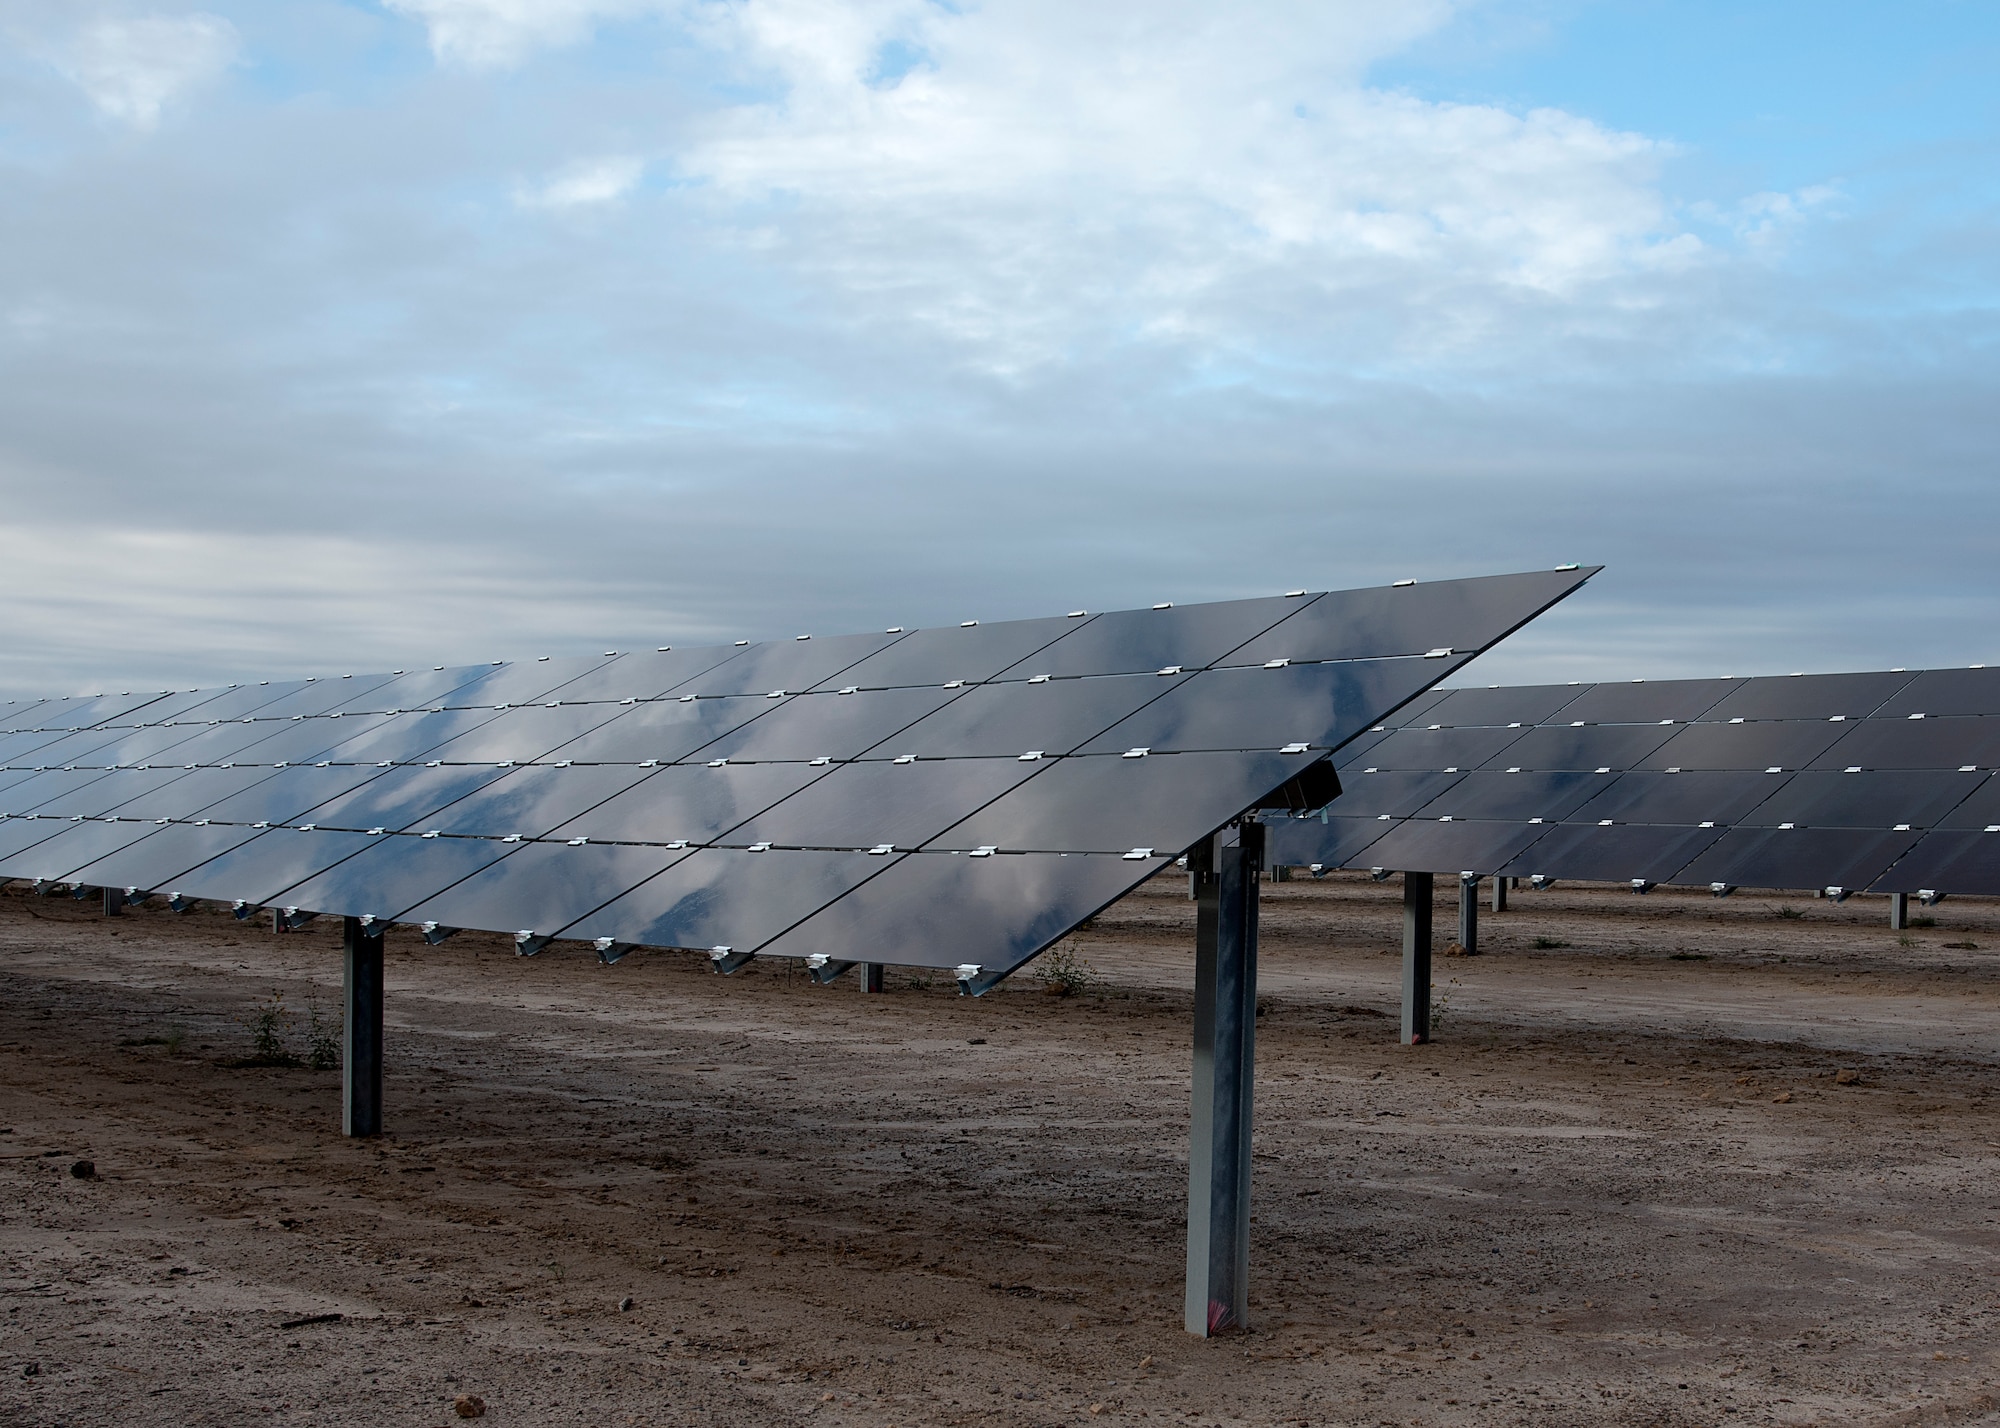 the first major solar array, encompassing 42 acres, opened Oct. 19 on Holloman Air Force Base, N.M. Over 1,300 facilities on-base will be powered by the array, meeting 50 percent of the base's summer day-time demand and 100 percent of the winter day-time demand. (U.S. Air Force photo by Airman 1st Class Kindra Stewart)